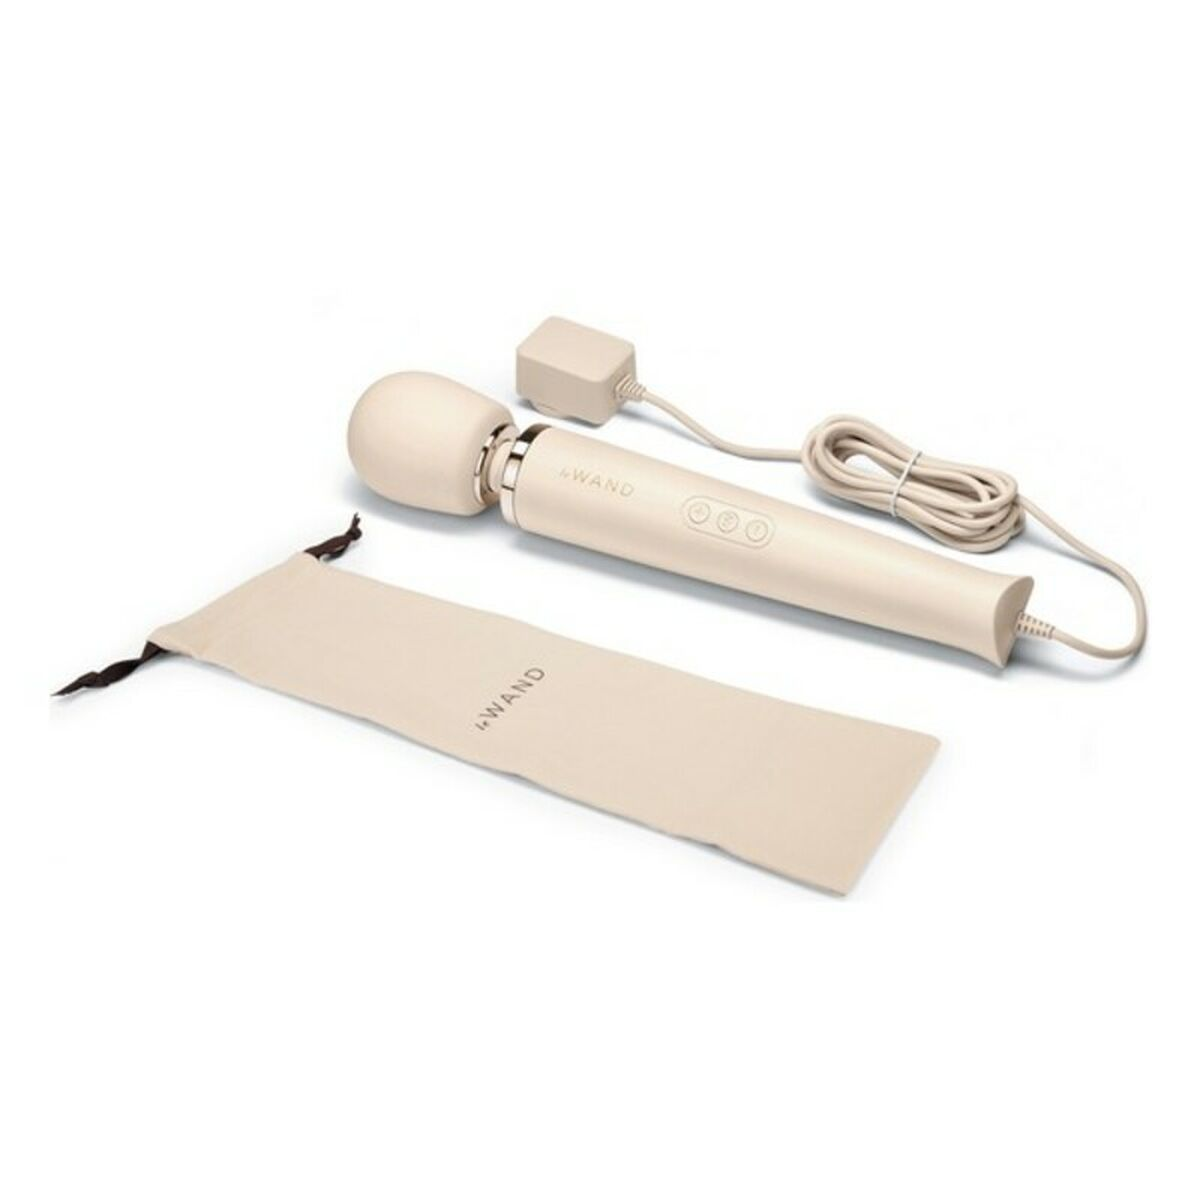 Vibrating Plug-In Vibrator Massager WAND Powerful LE